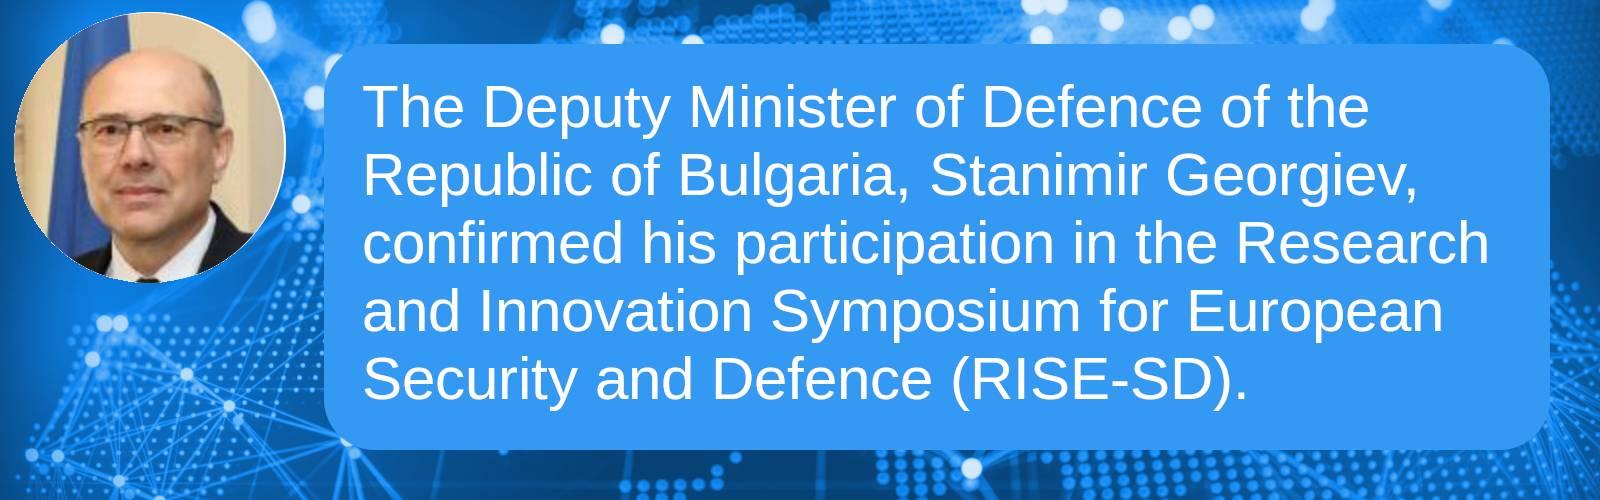 The Deputy Minister of Defence of the Republic of Bulgaria, Stanimir Georgiev